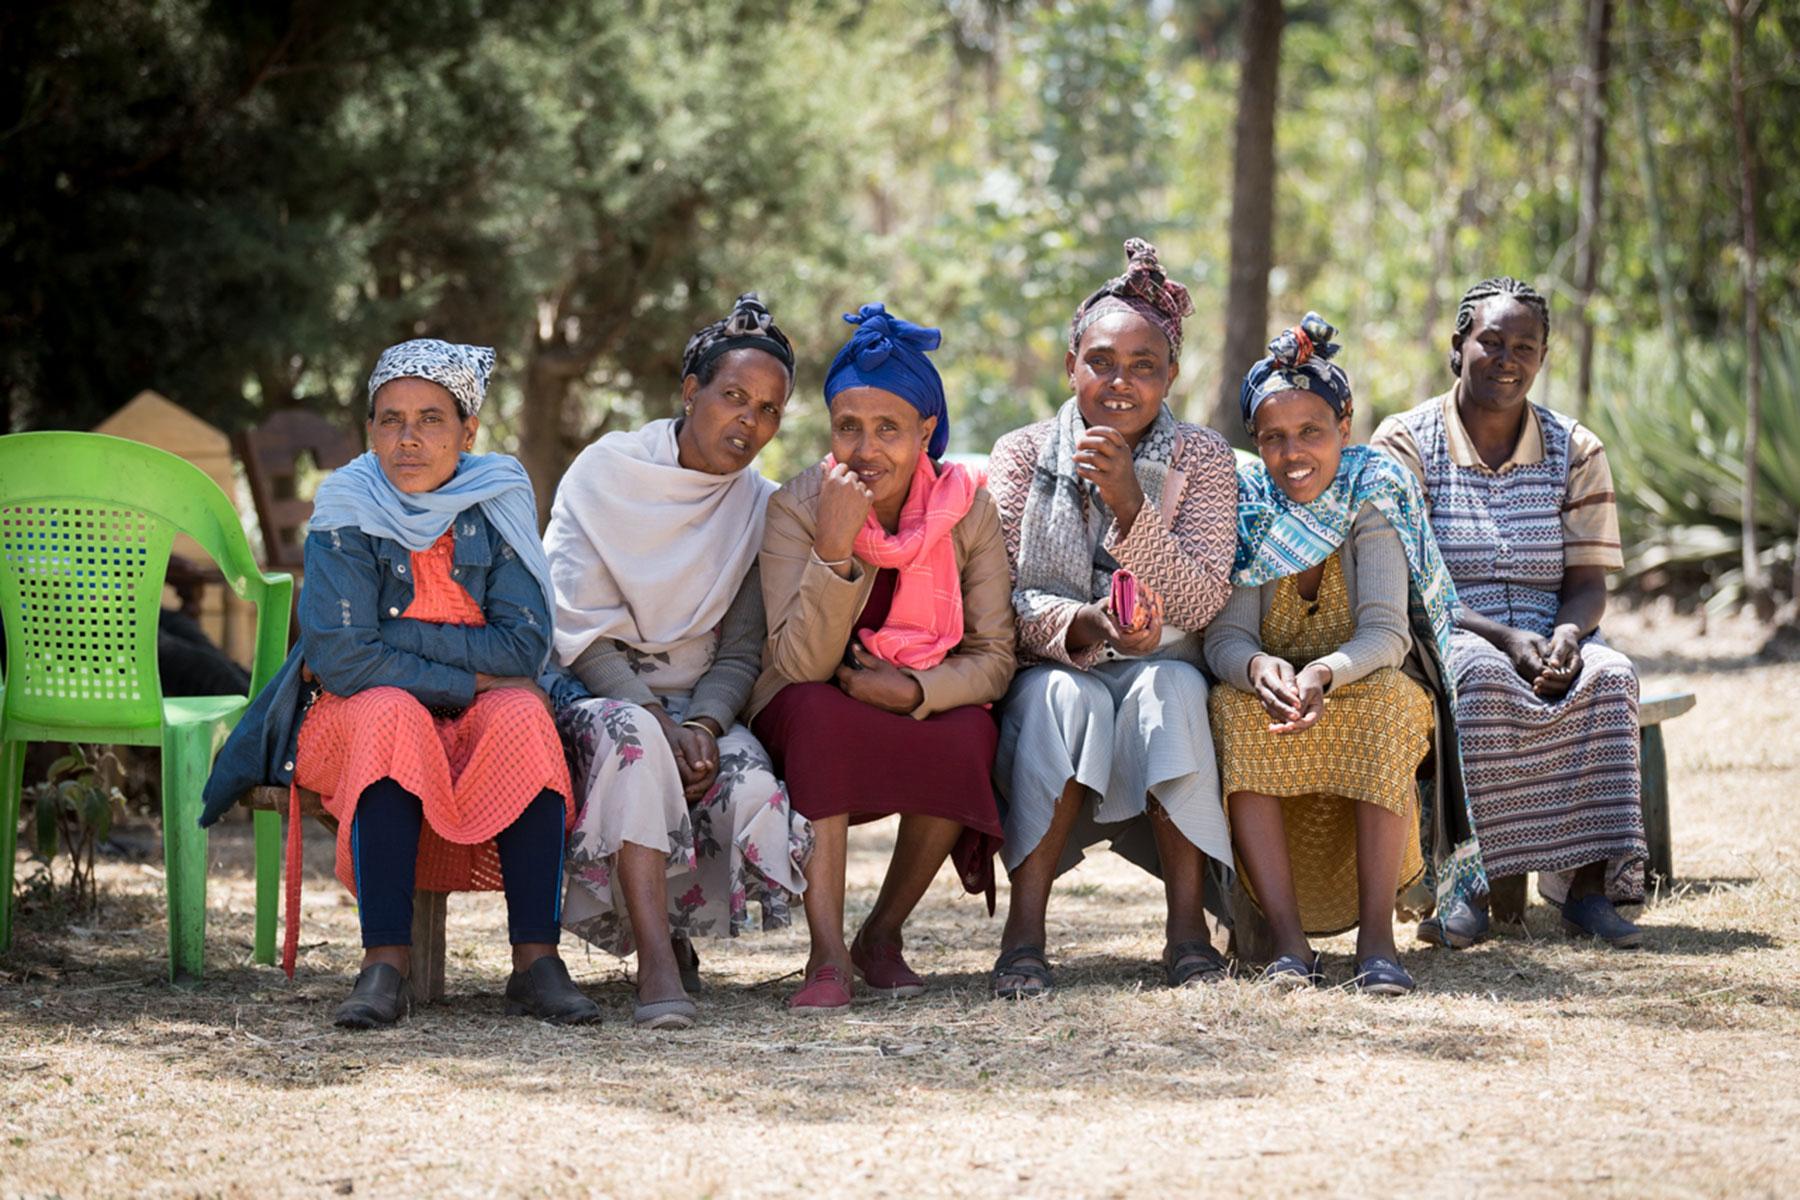 Participants in the womenâs self-help group Tesfa (âhopeâ) gather for the day. All photos: LWF/Albin Hillert